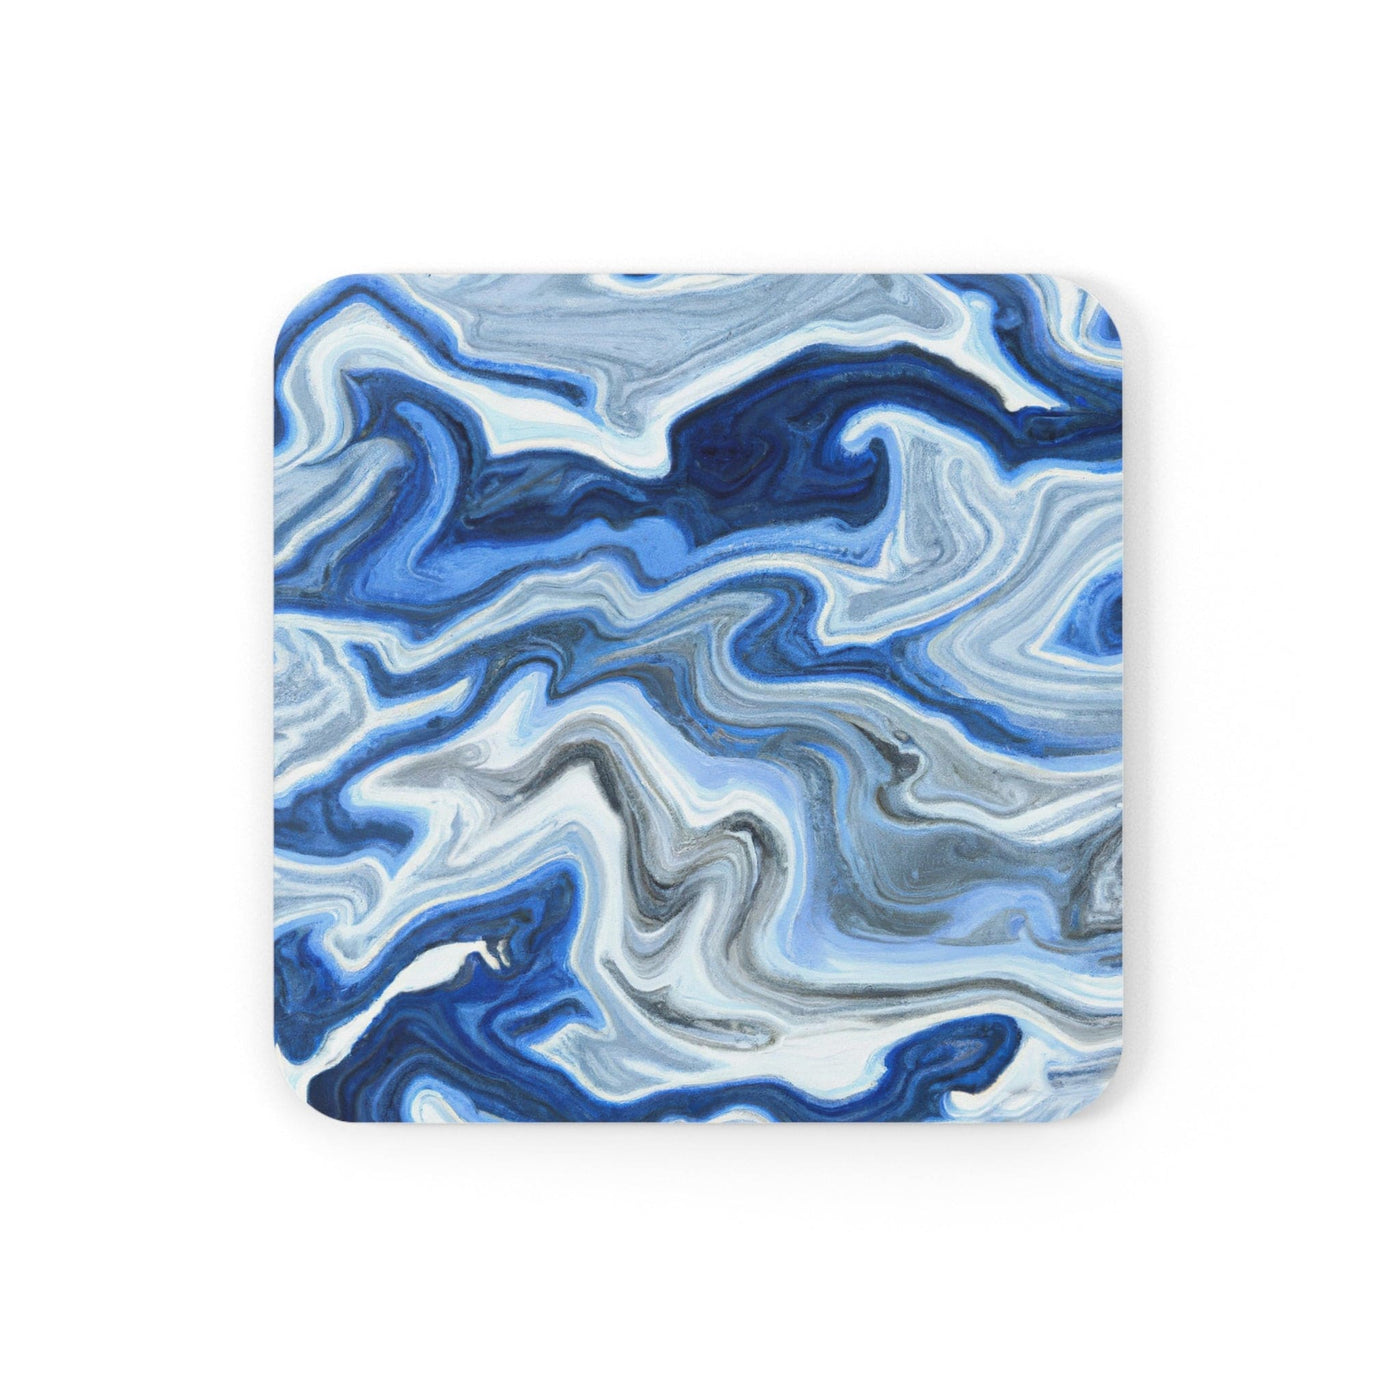 Coaster Set Of 4 For Drinks Blue White Grey Marble Pattern - Decorative